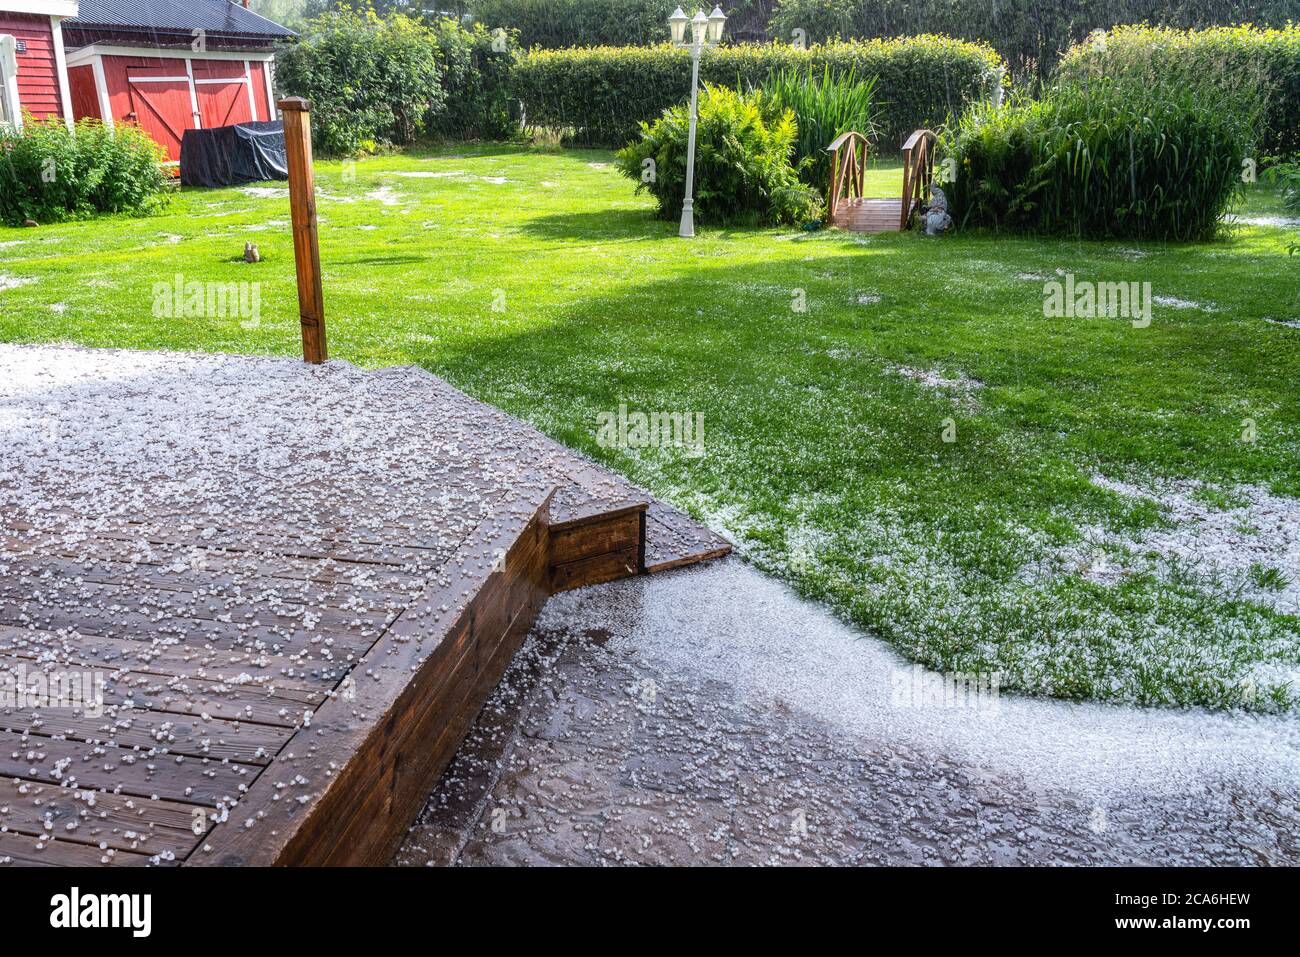 View at wooden terrace, stone path and green garden with hail stones during hailstorm from sky with sunlight Stock Photo